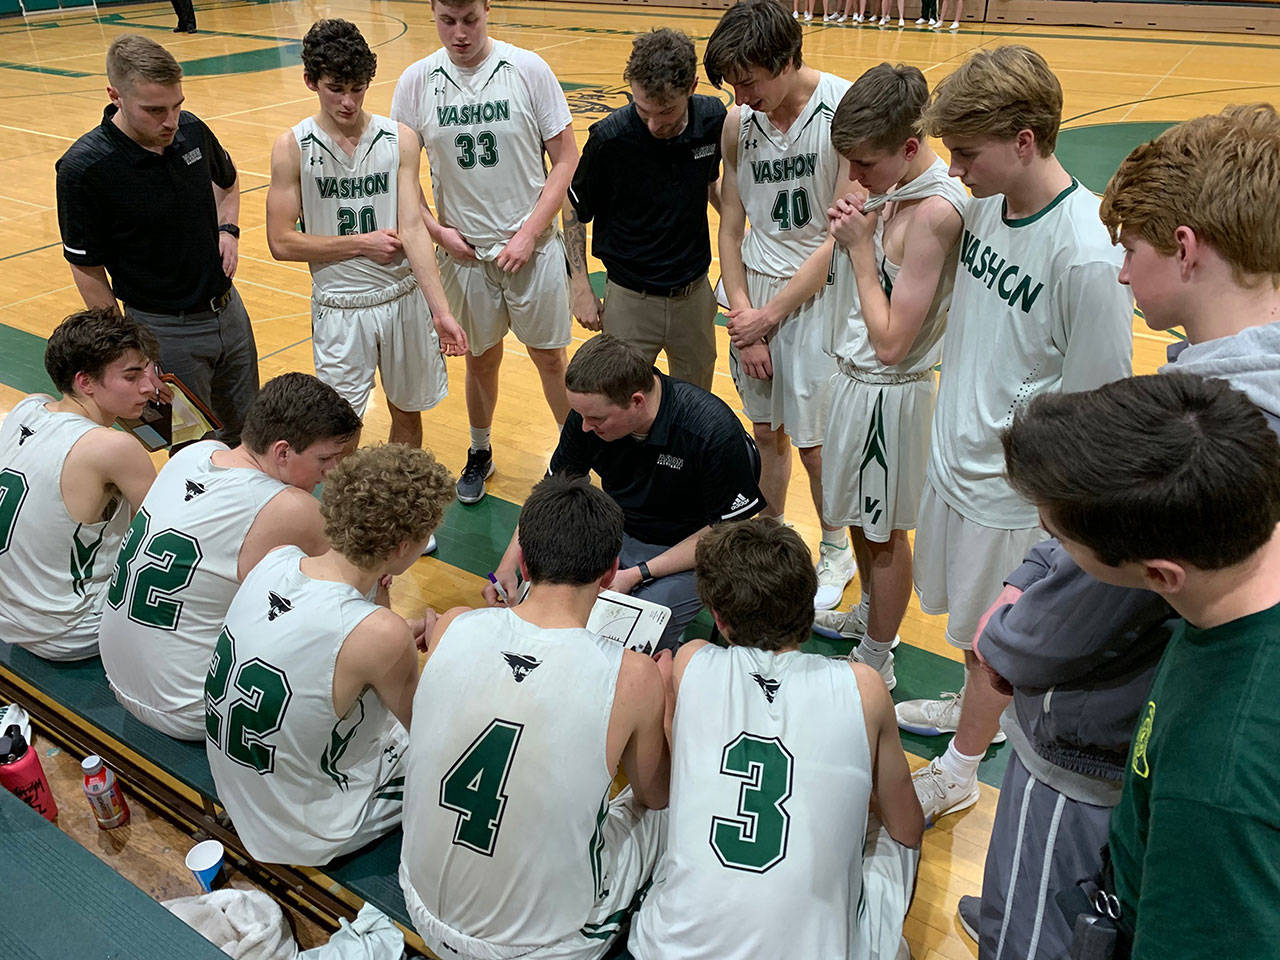 Coach Andy Sears, assistant coaches and the Vashon High School boys basketball team huddle during a game. (Doug Langworthy / Photo)